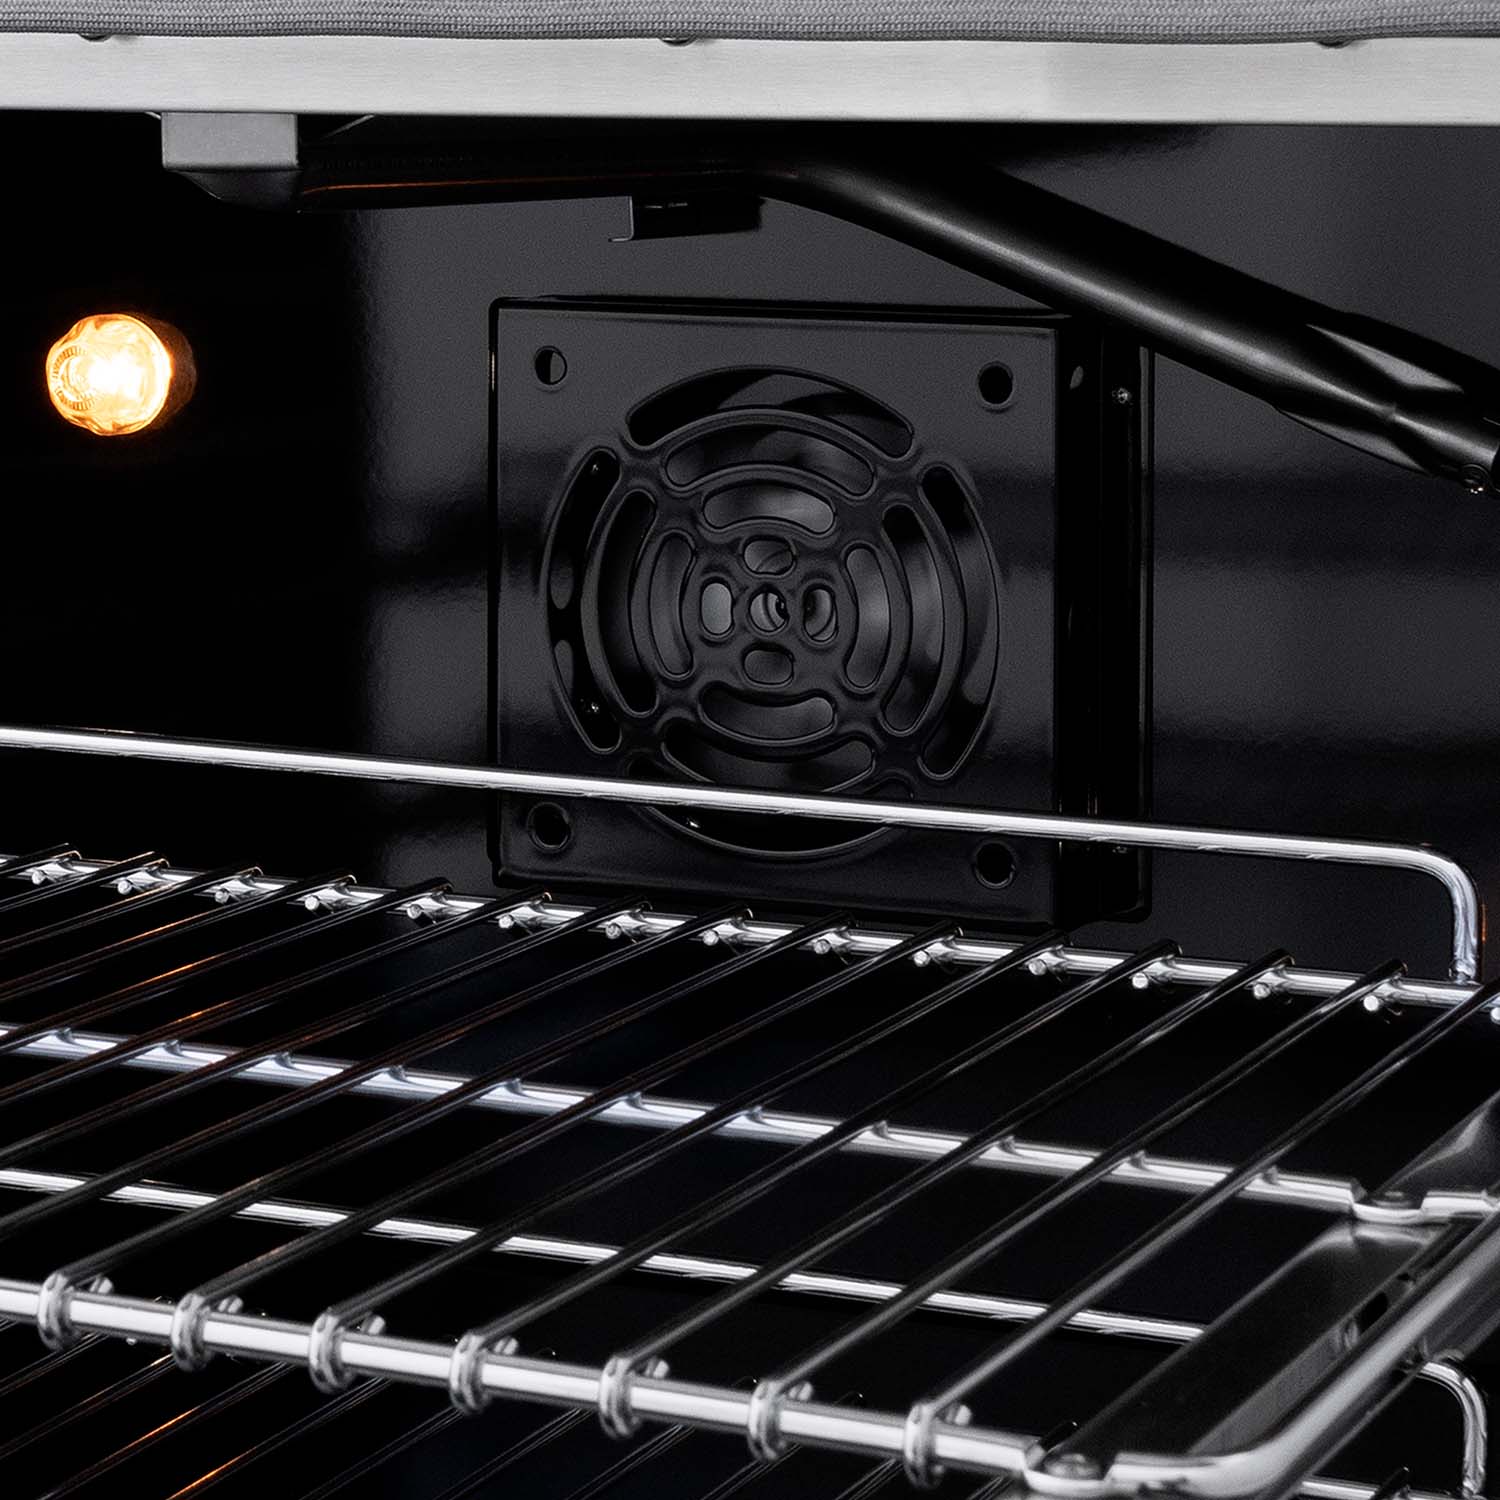 ZLINE 36 in. 5.2 cu. ft. 6 Burner Gas Range with Convection Gas Oven in Stainless Steel (SGR36) convection fan and lighting inside gas oven close-up.